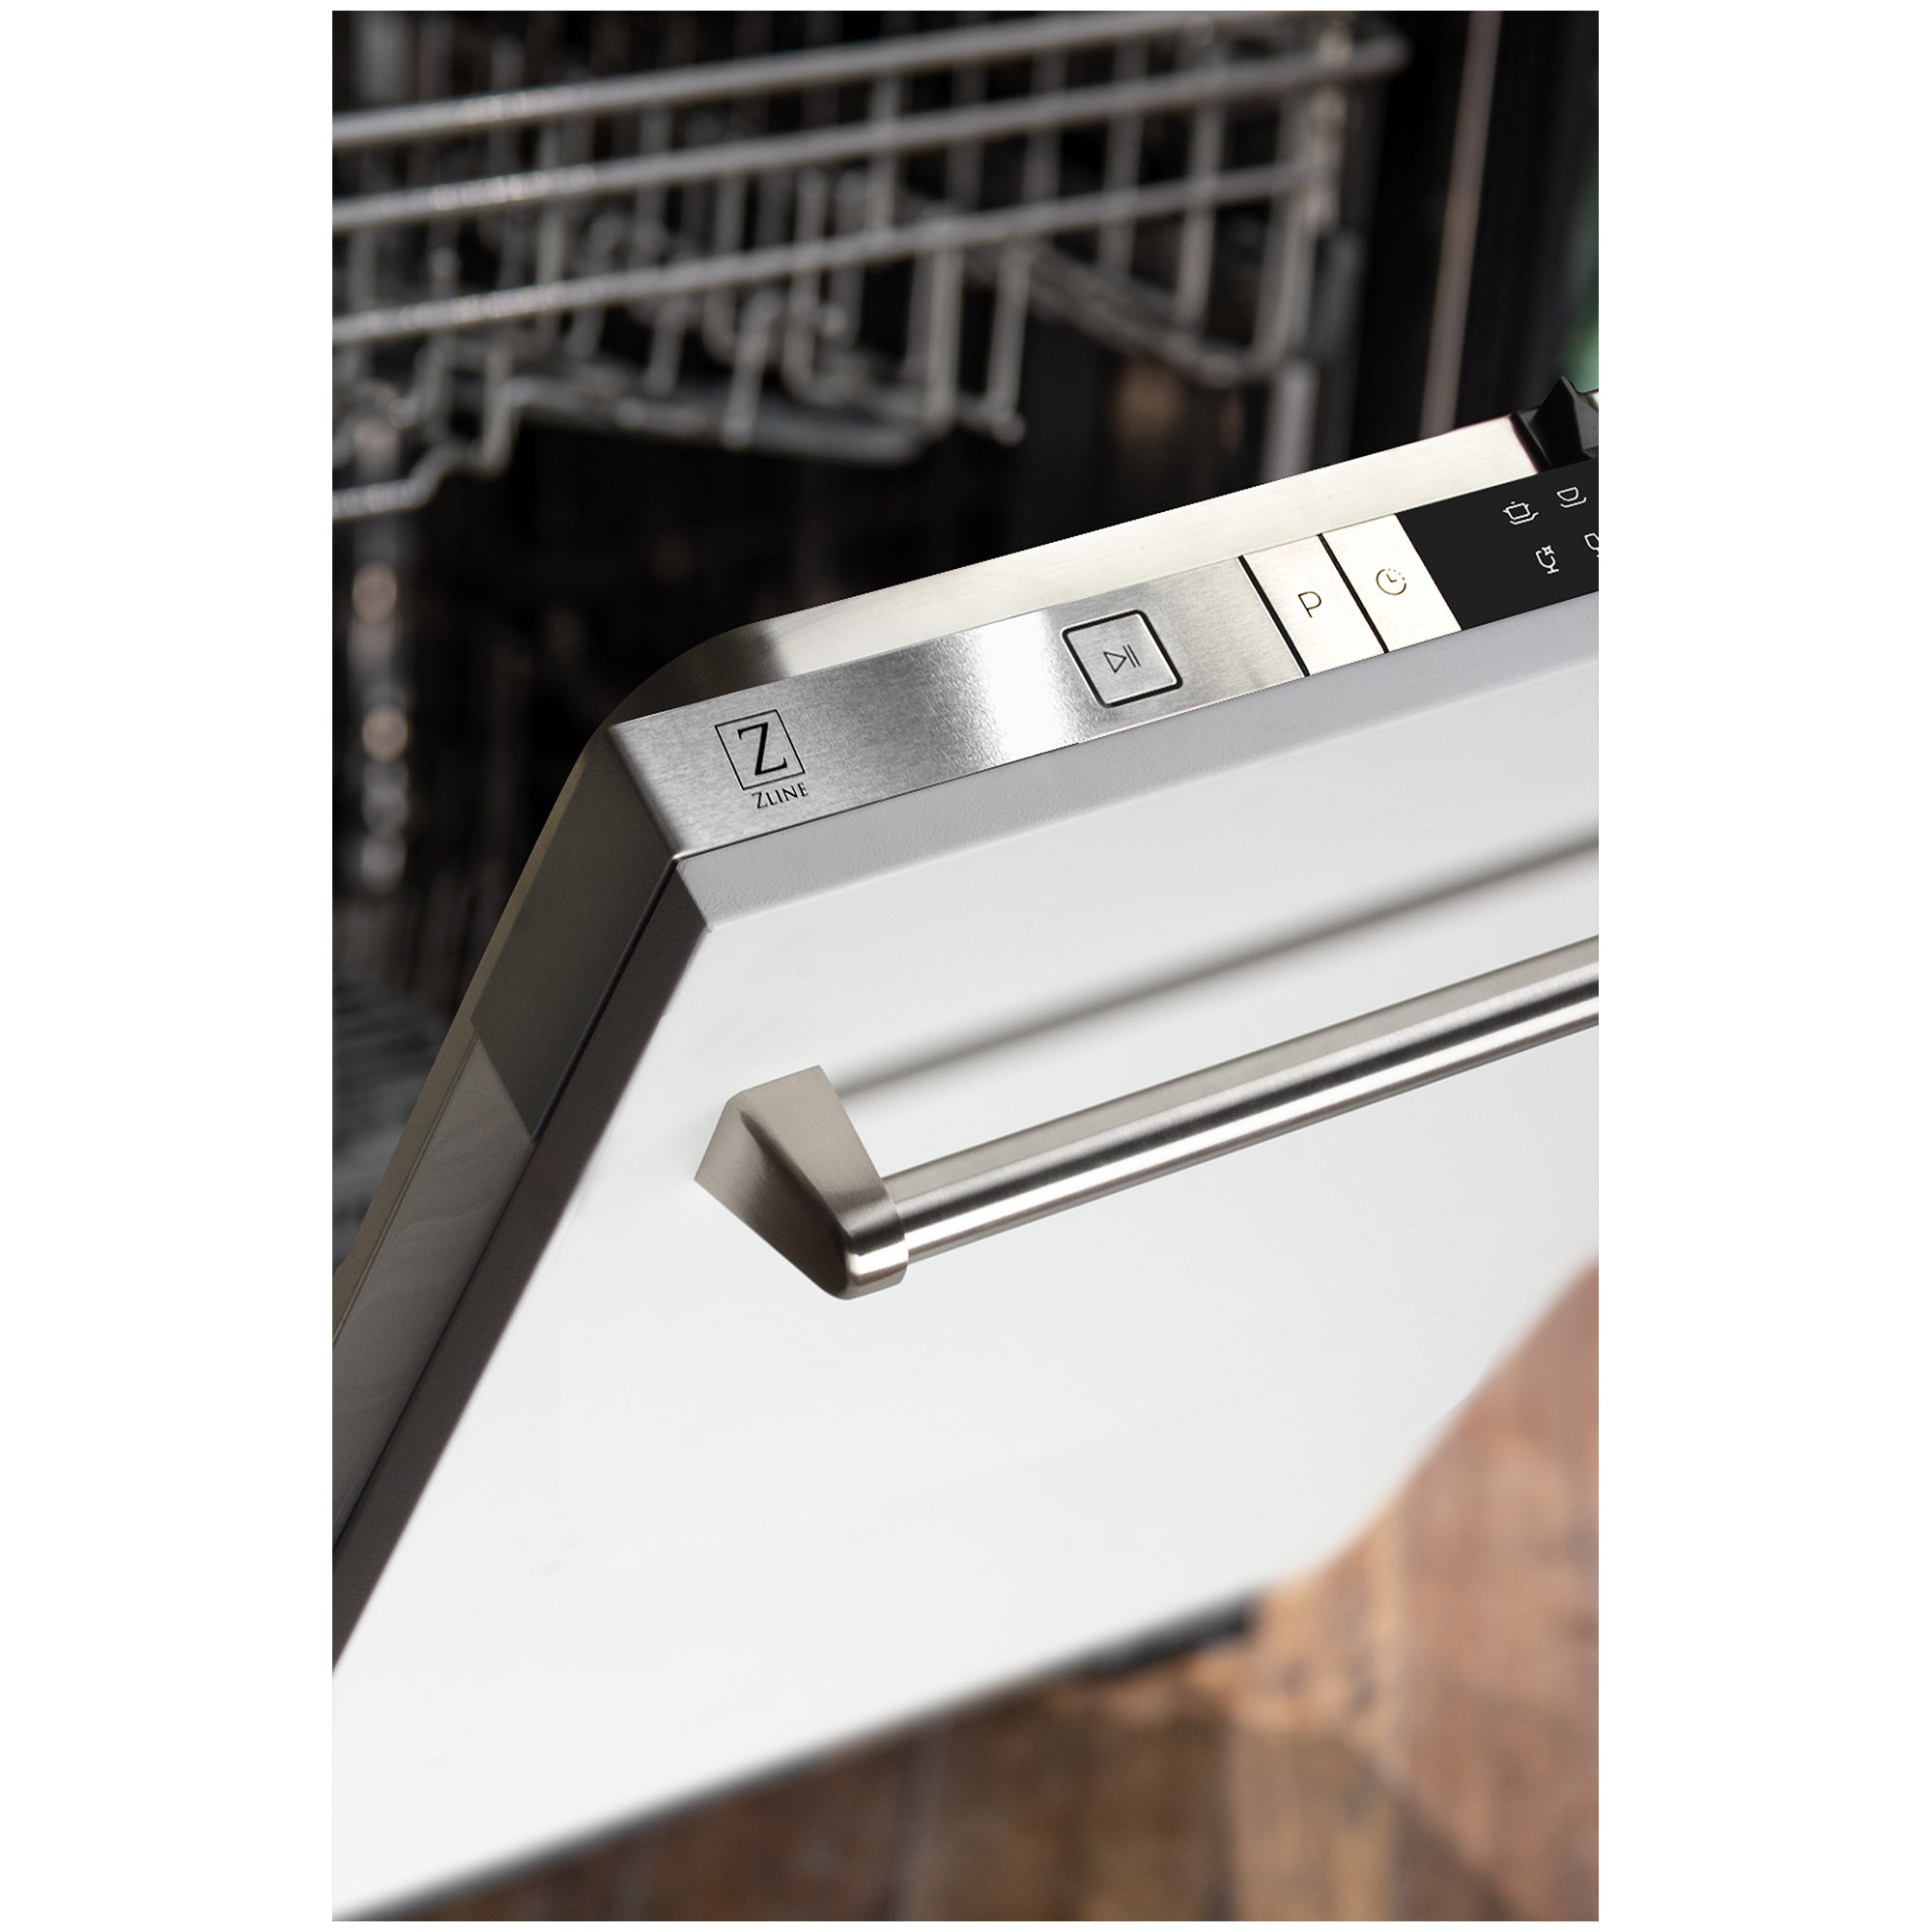 ZLINE 24 in. White Matte Top Control Built-In Dishwasher with Stainless Steel Tub and Traditional Style Handle, 52dBa (DW-WM-24) built-in to cabinets in a luxury kitchen.